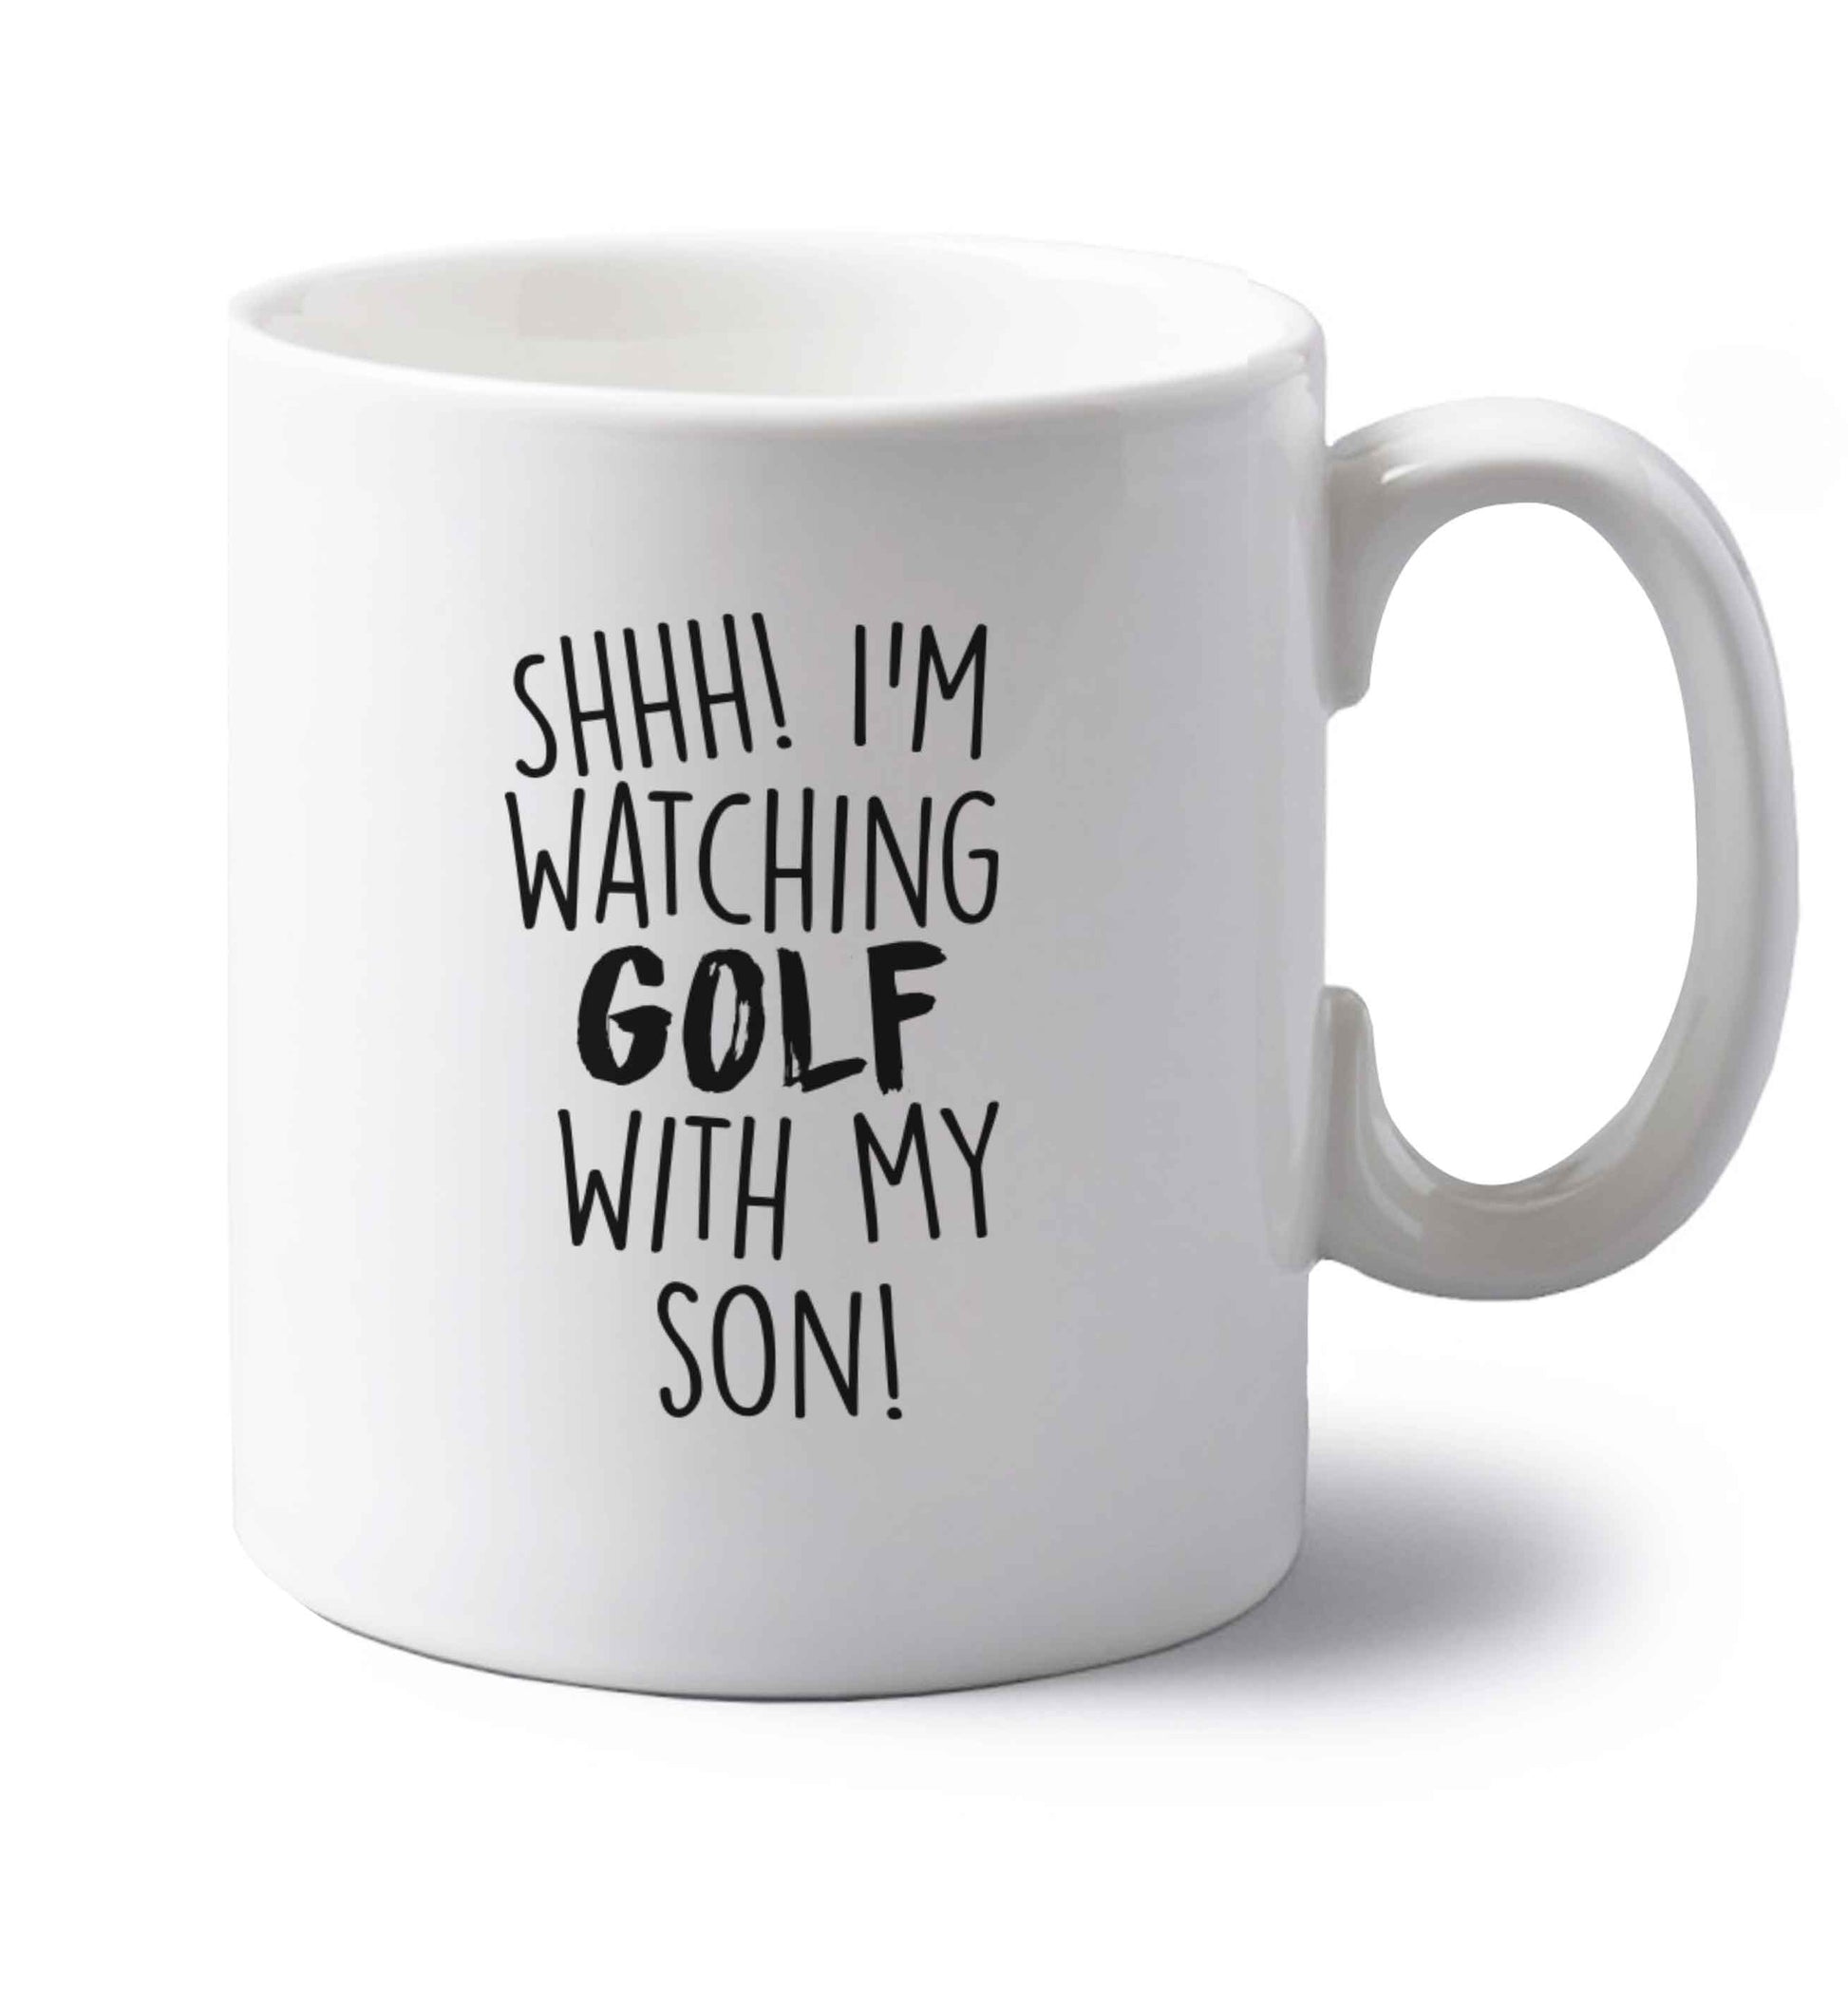 Shh I'm watching golf with my son left handed white ceramic mug 